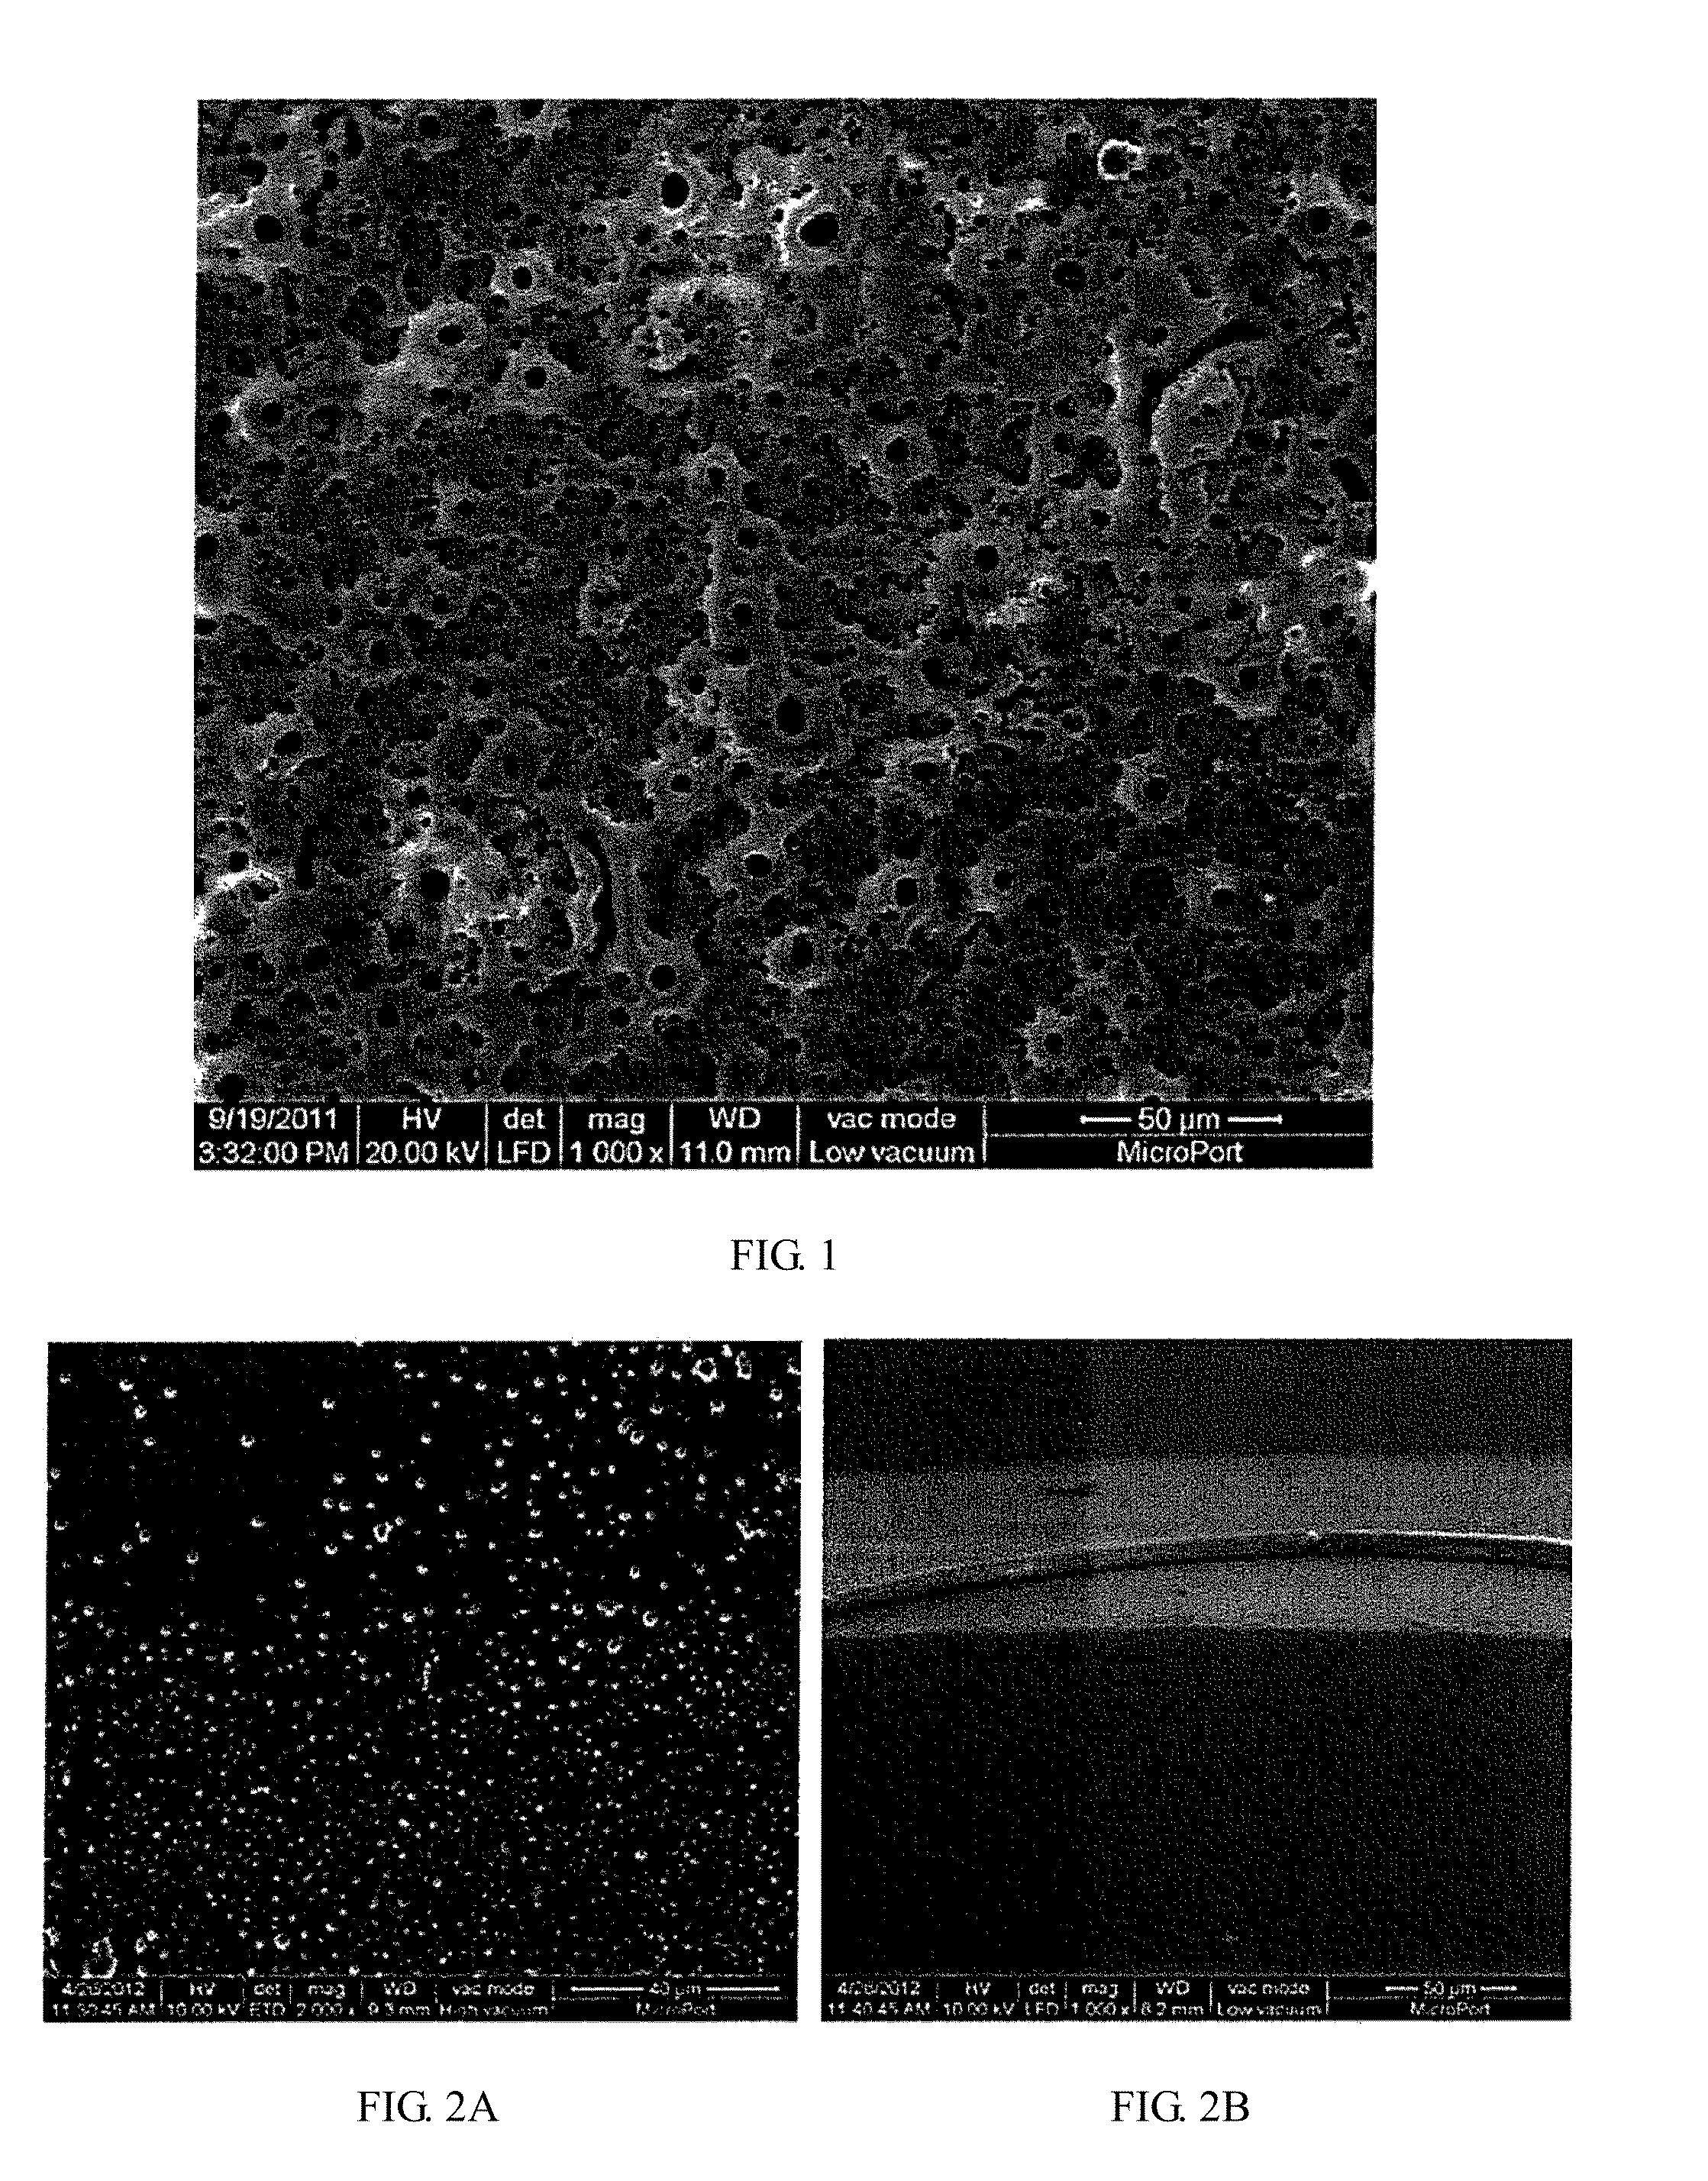 Multifunctional composite drug coating sustained release system and method for manufacturing same